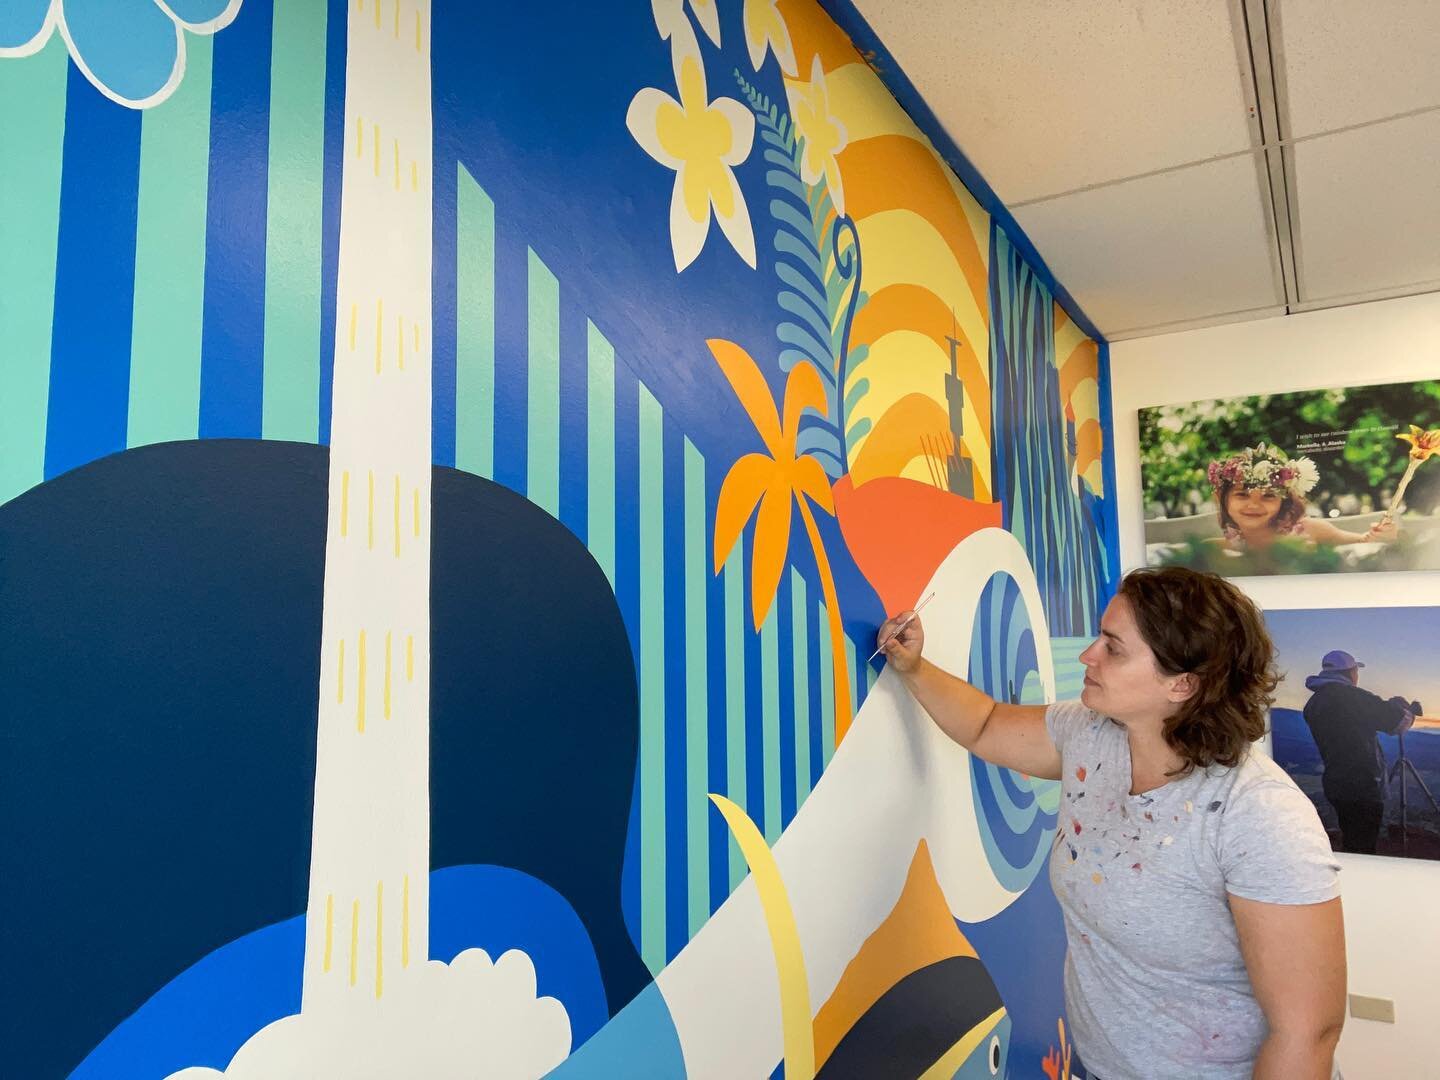 I recently finished a mural for @makeawishhawaii and it turned out amazing! I&rsquo;ll be posting some process videos soon. 😁
.
My imaginative brain had a ball designing lots of fun details throughout the composition. 
.
#hawaiimural #hawaiimurals #